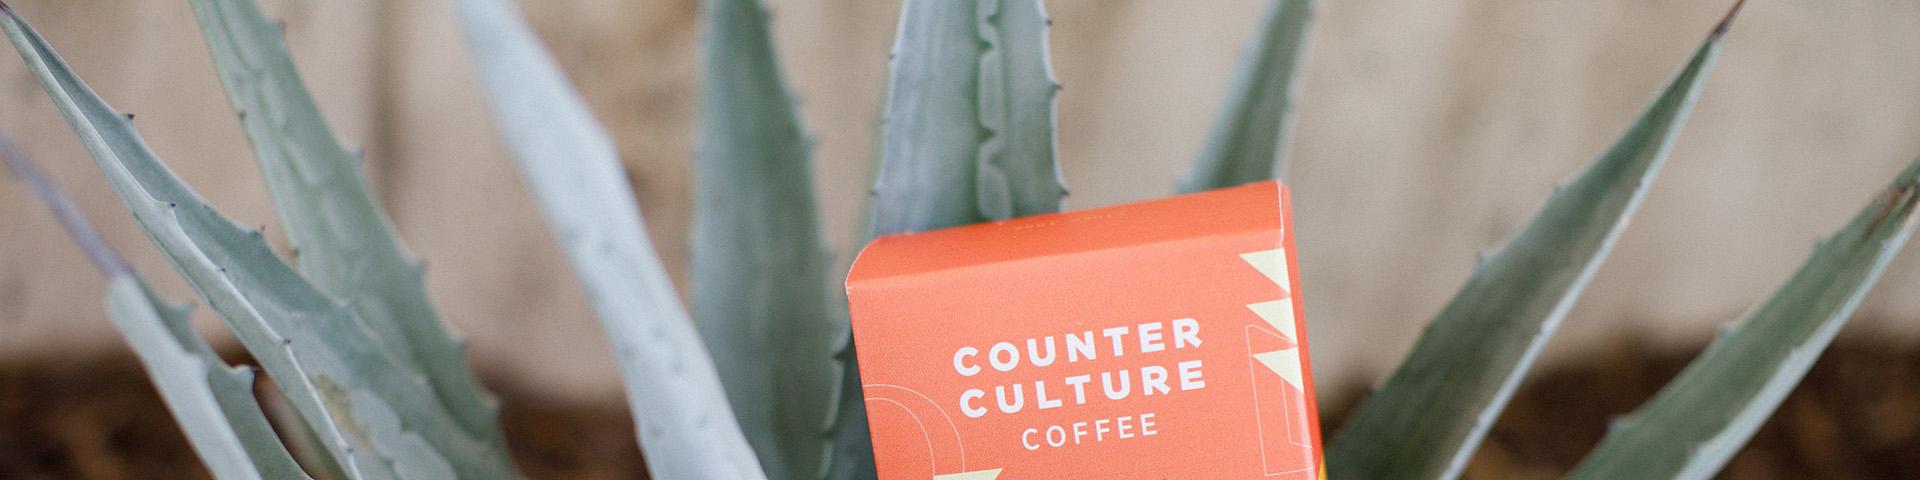 Banner Counter Culture Coffee